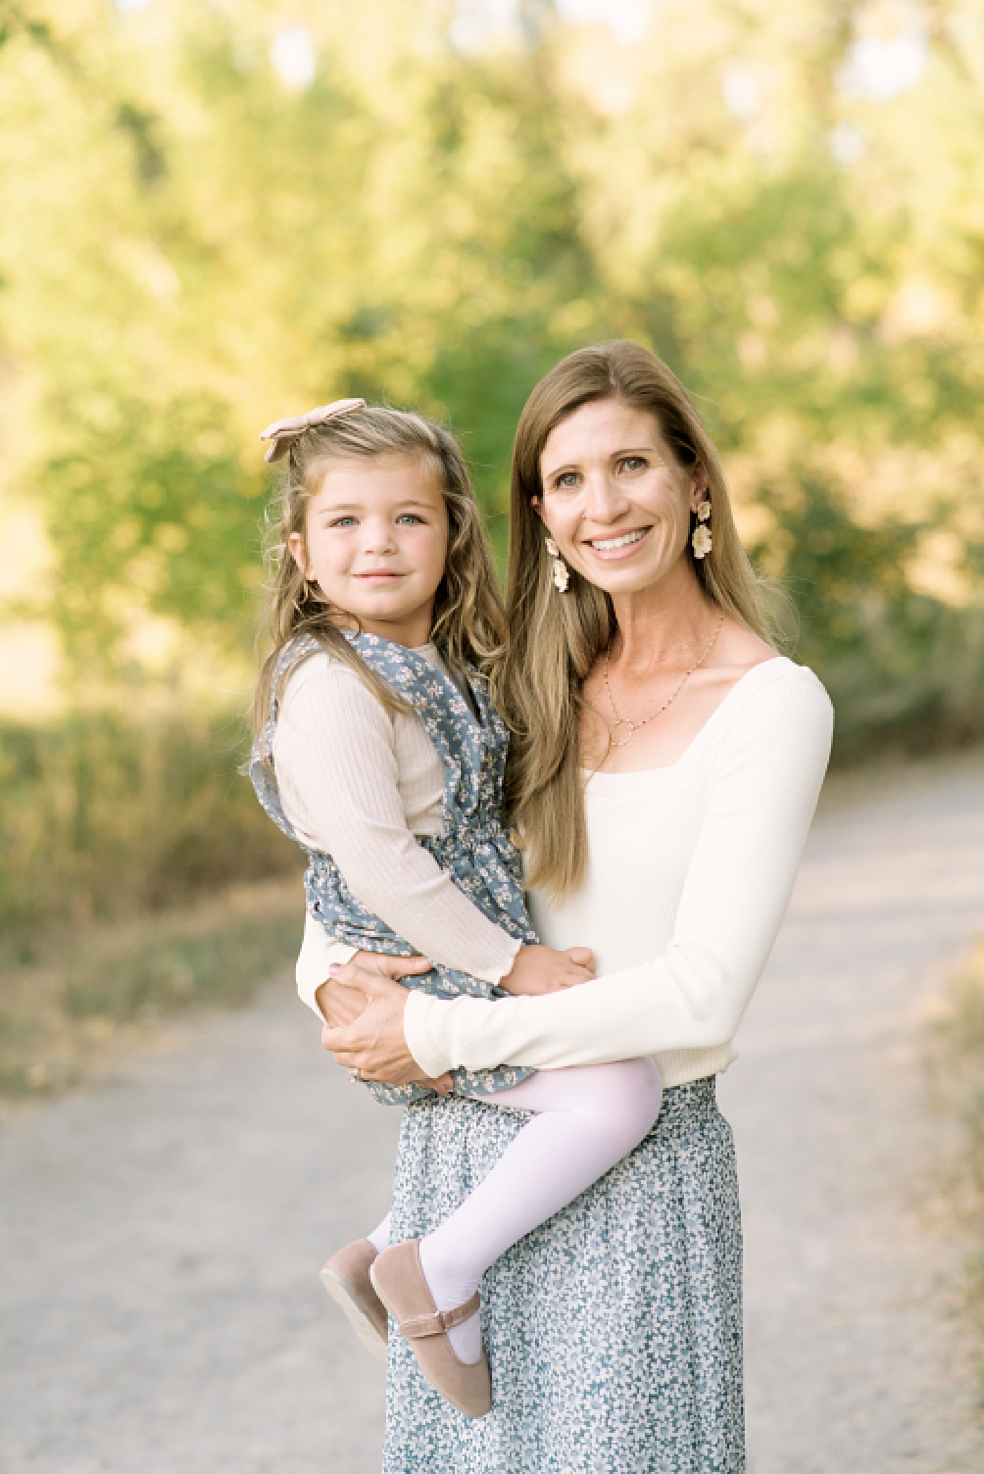 Mom and daughter smiling together | Photo by Madison Alabama Family Photographer Jessica Lee